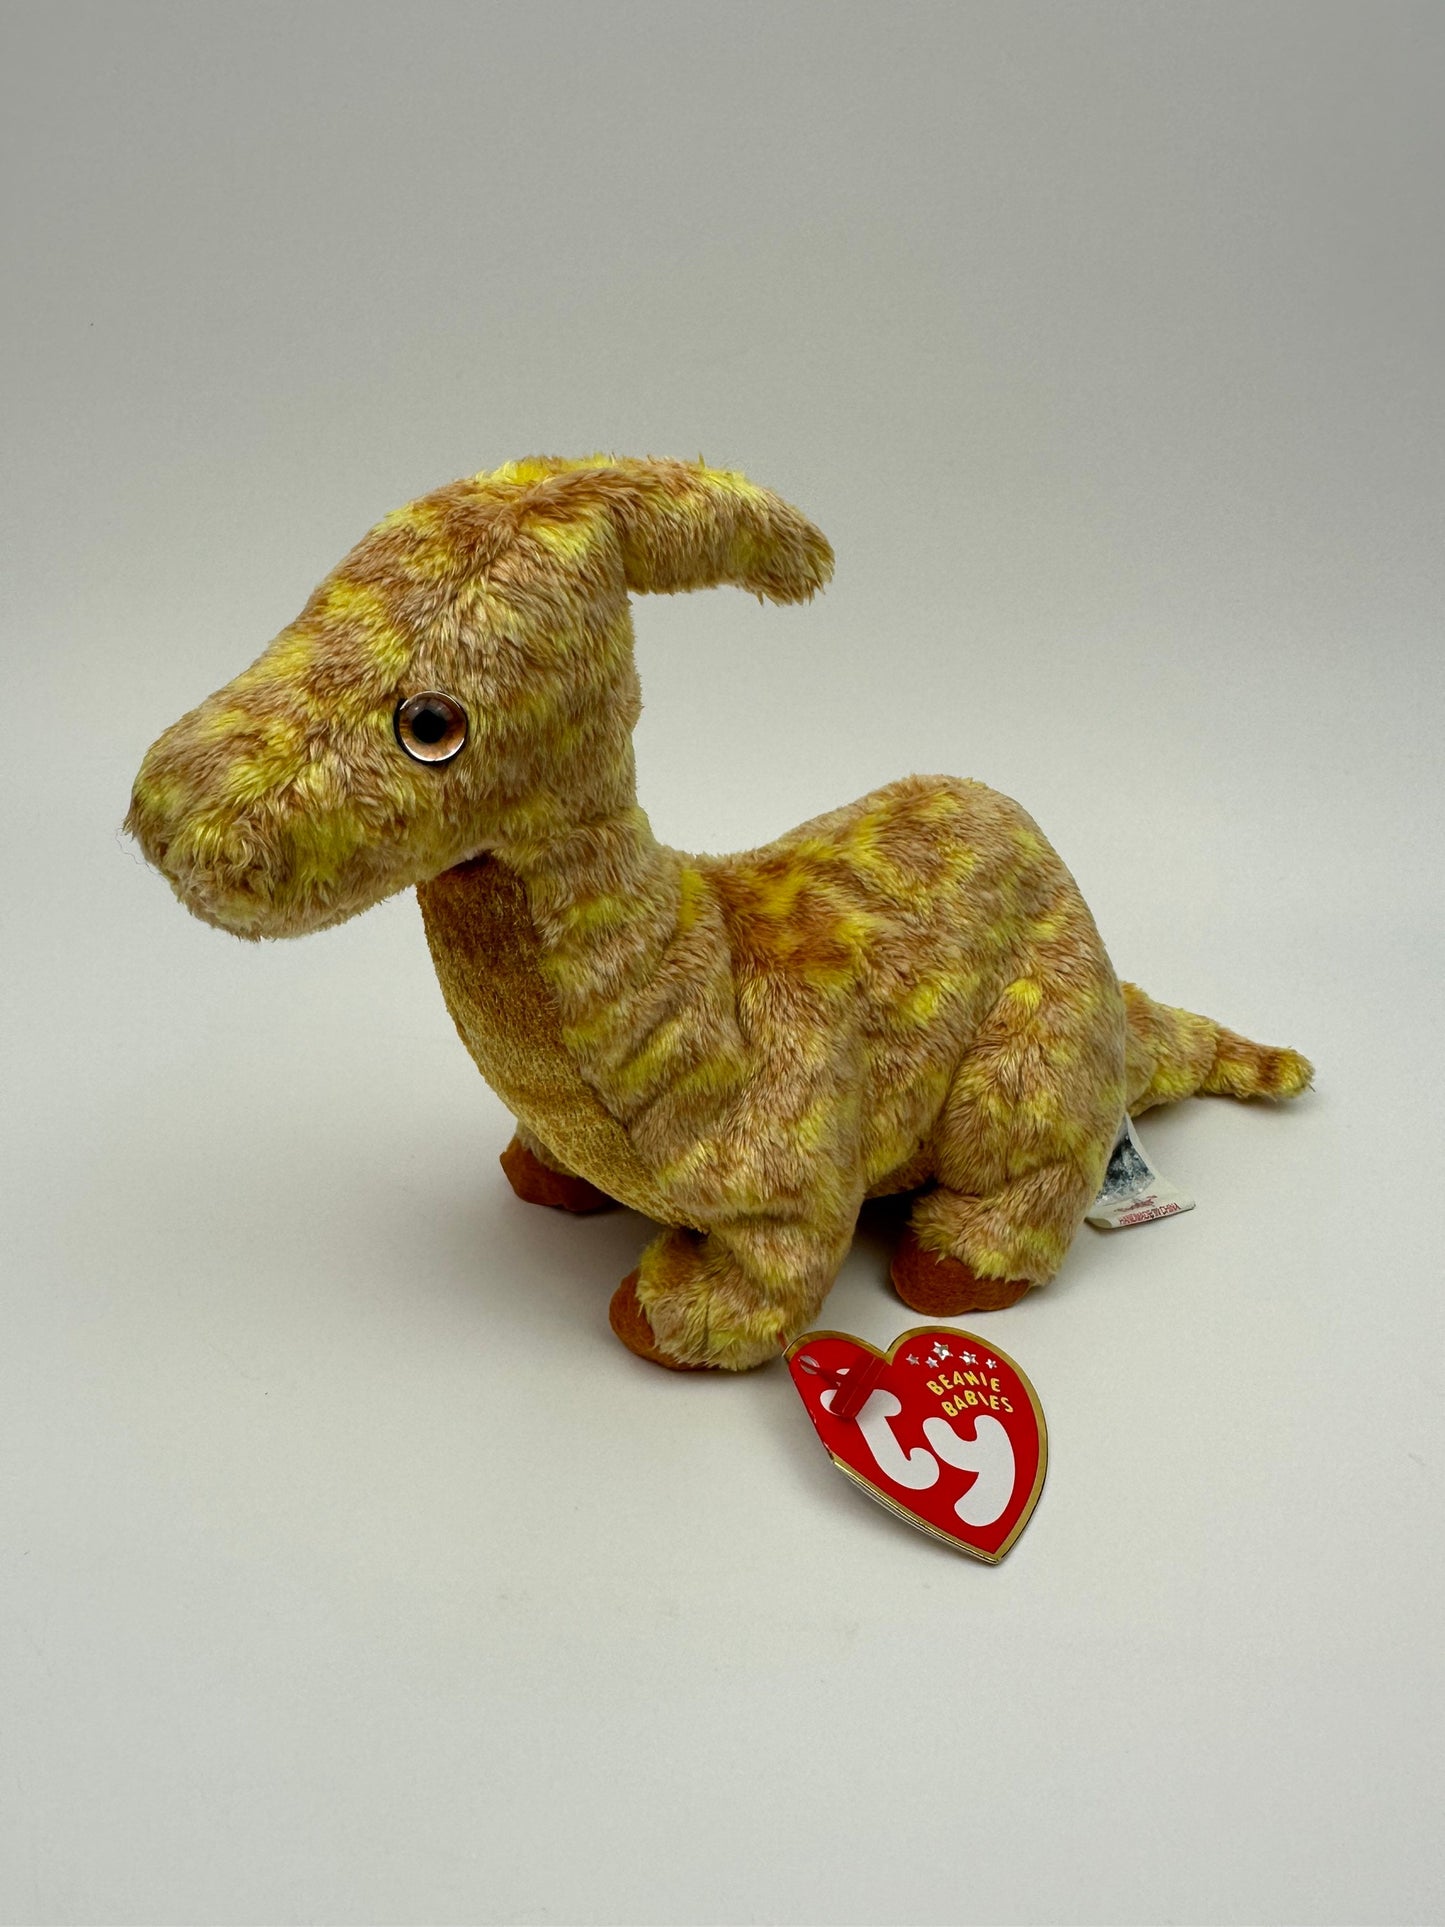 Ty Beanie Baby “Tooter” the Adorable Dinosaur Plush (8 inch)